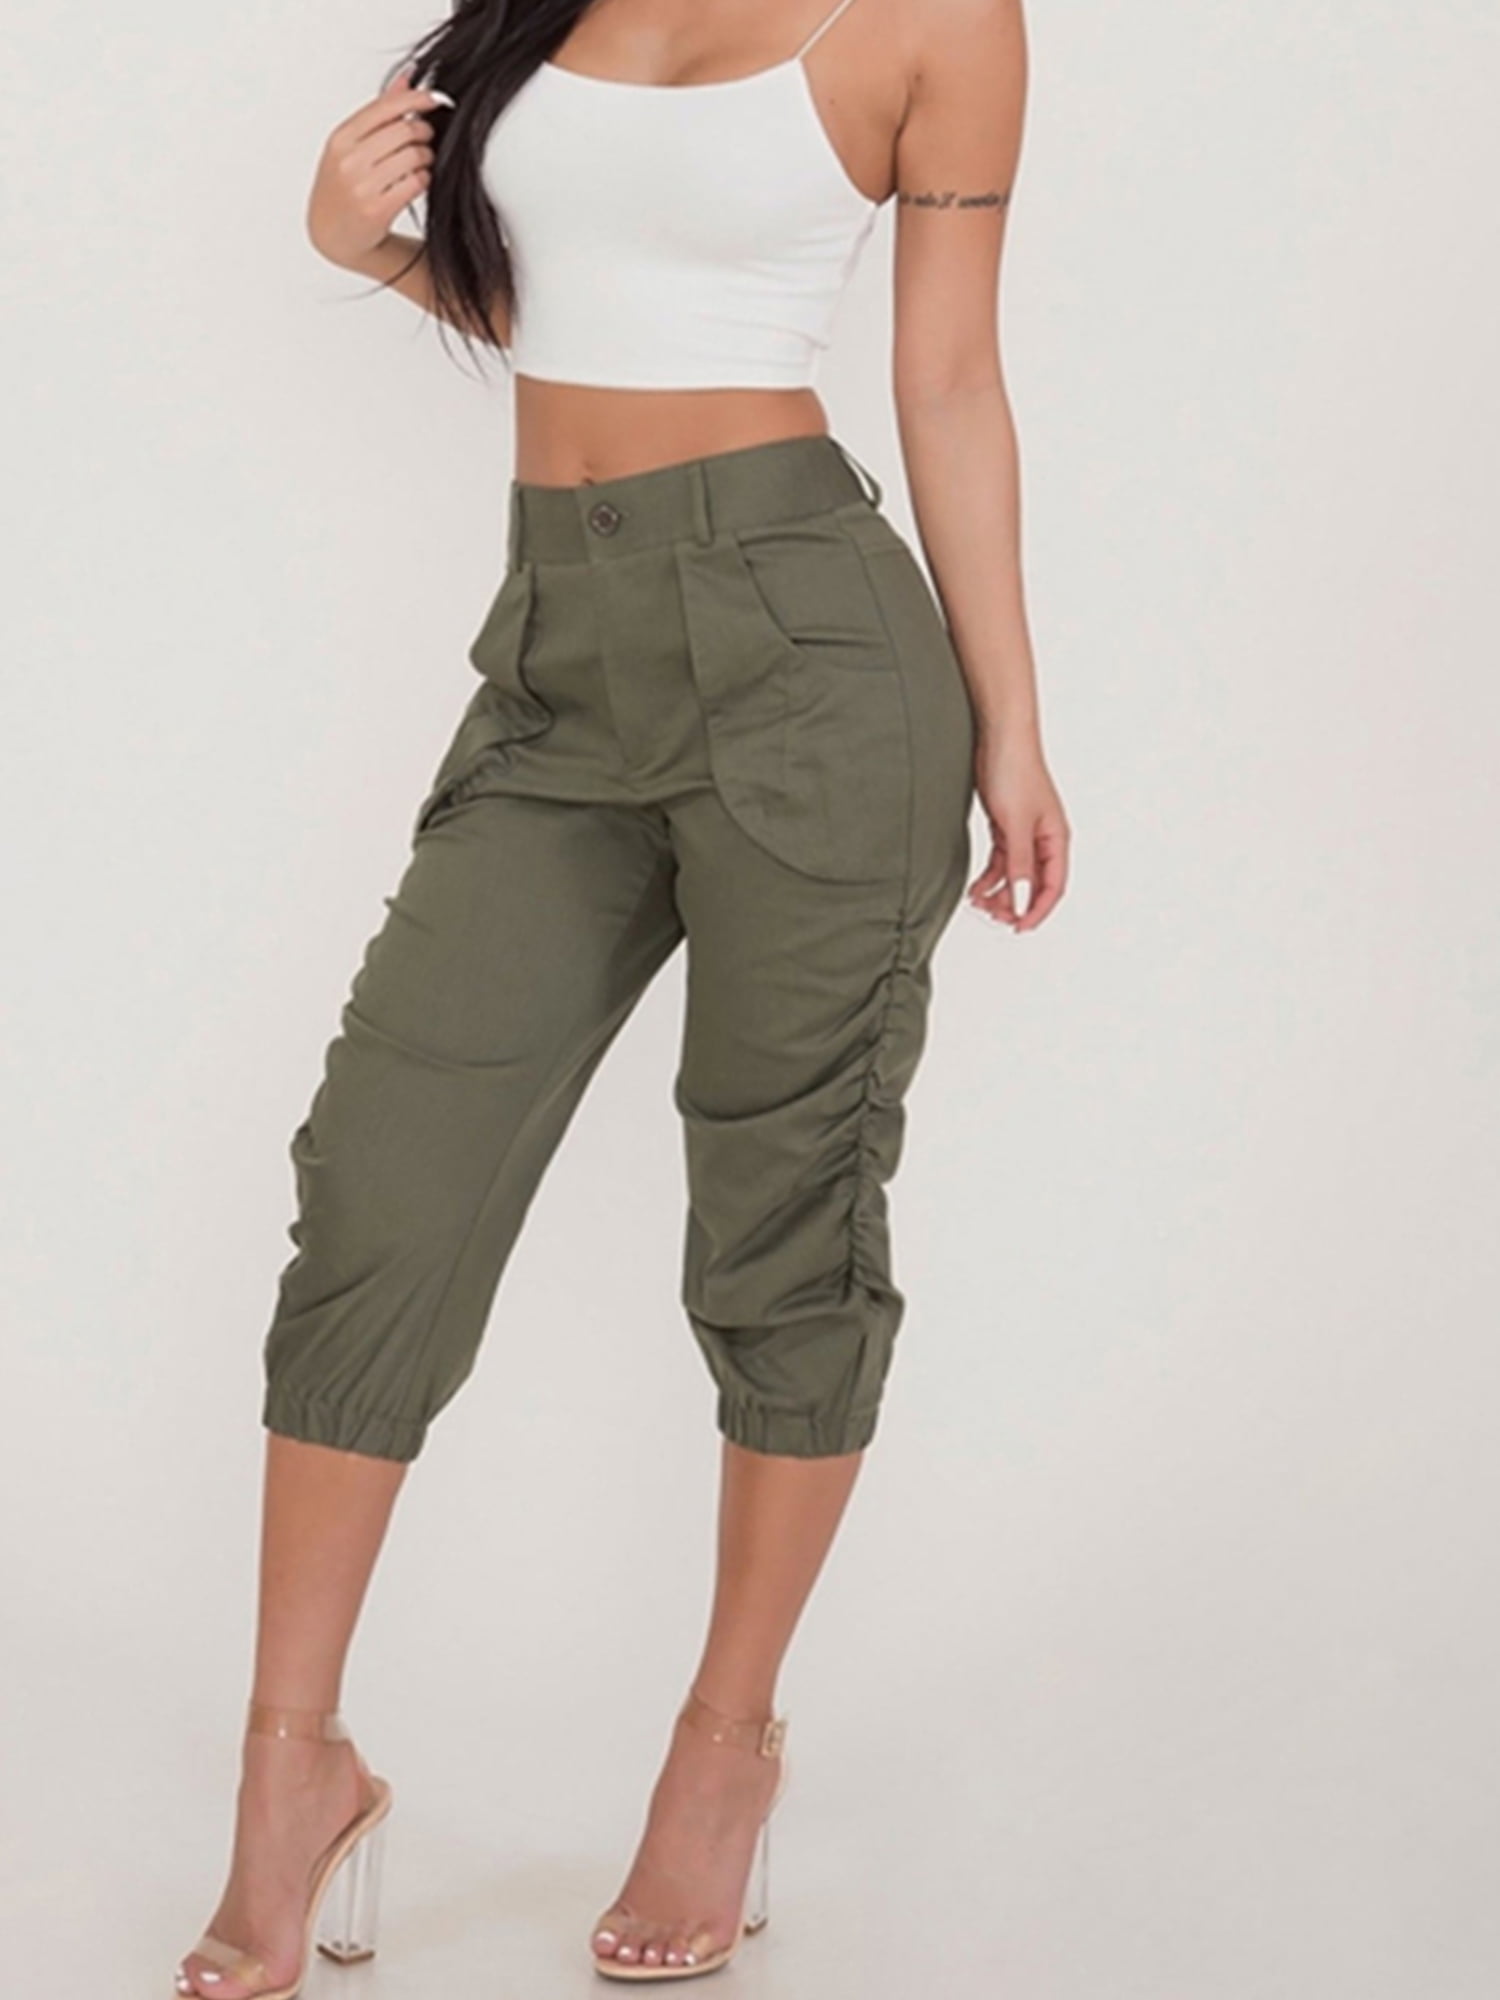 5 Outfits With Olive Green Linen Pants for Summer | Jogger pants outfit  women, Green linen pants, Olive linen pants